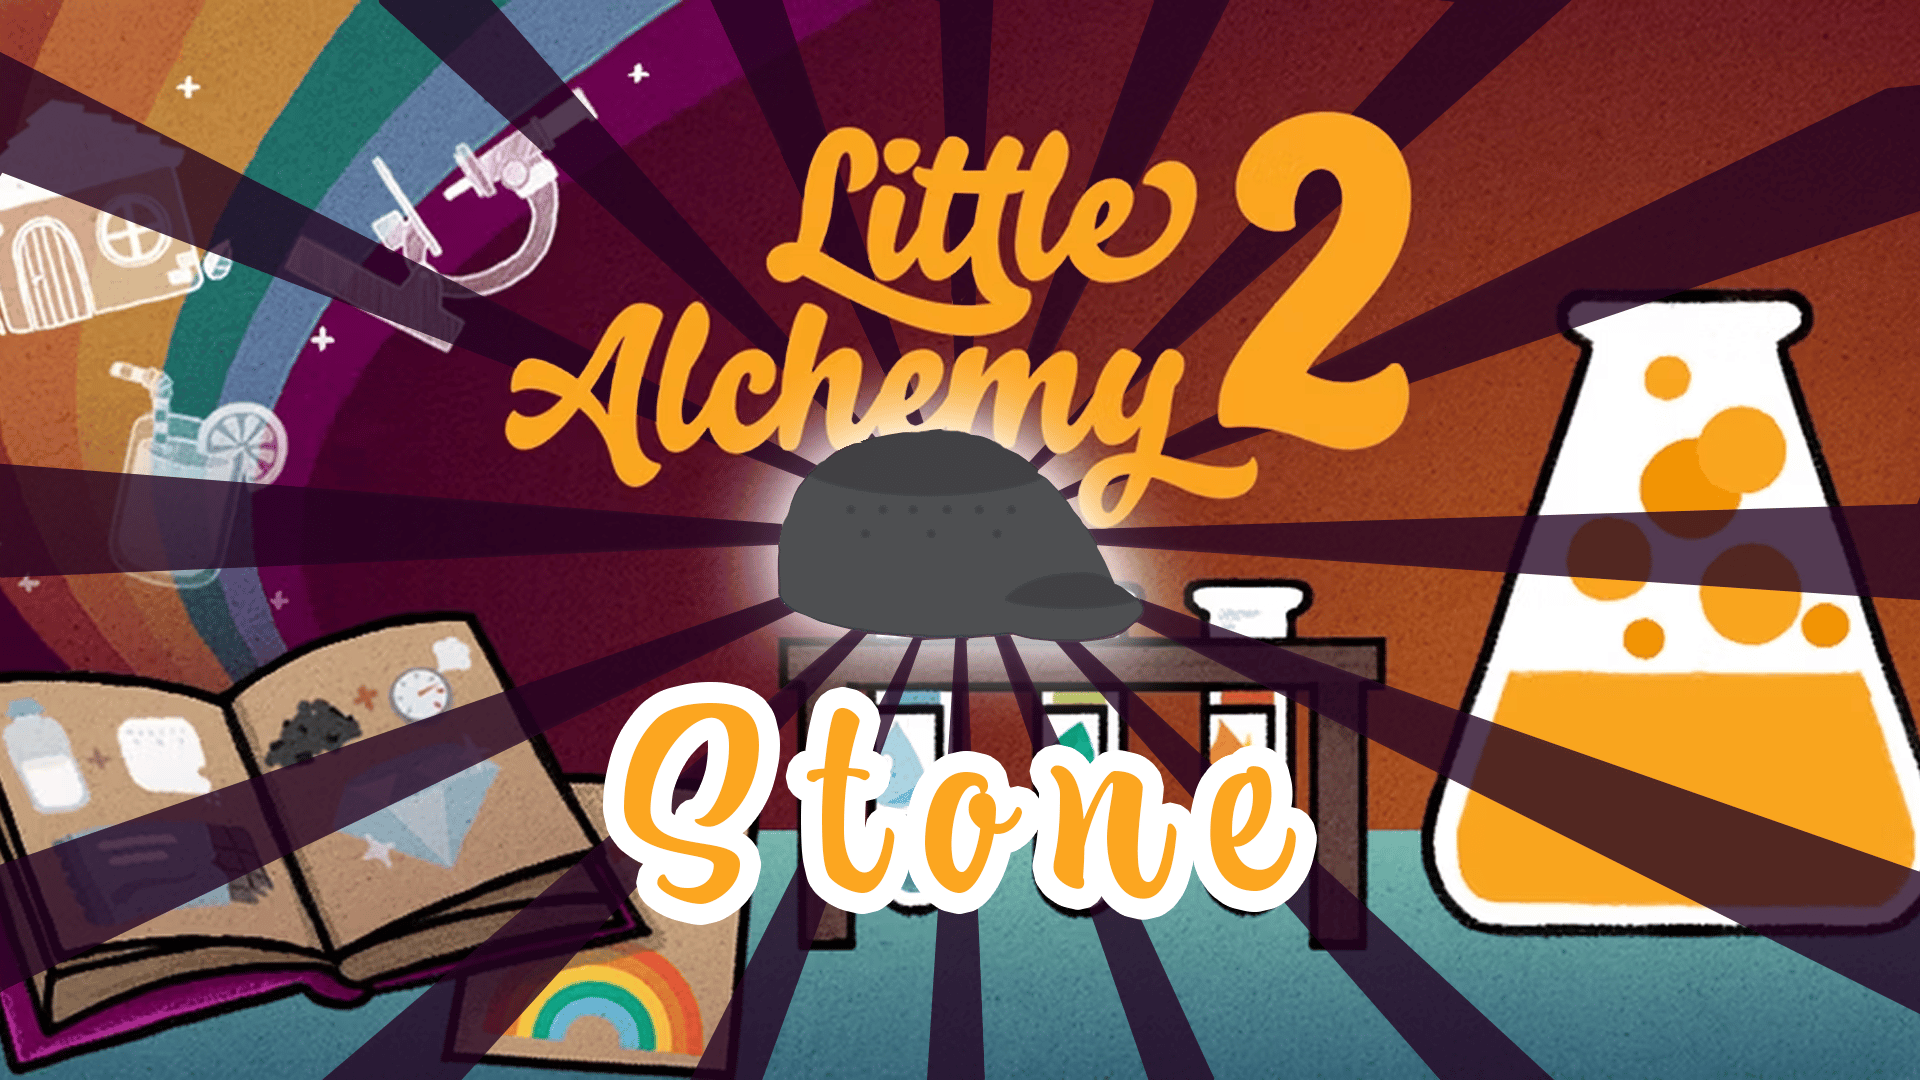 Play Little Alchemy 2 Online for Free on PC & Mobile